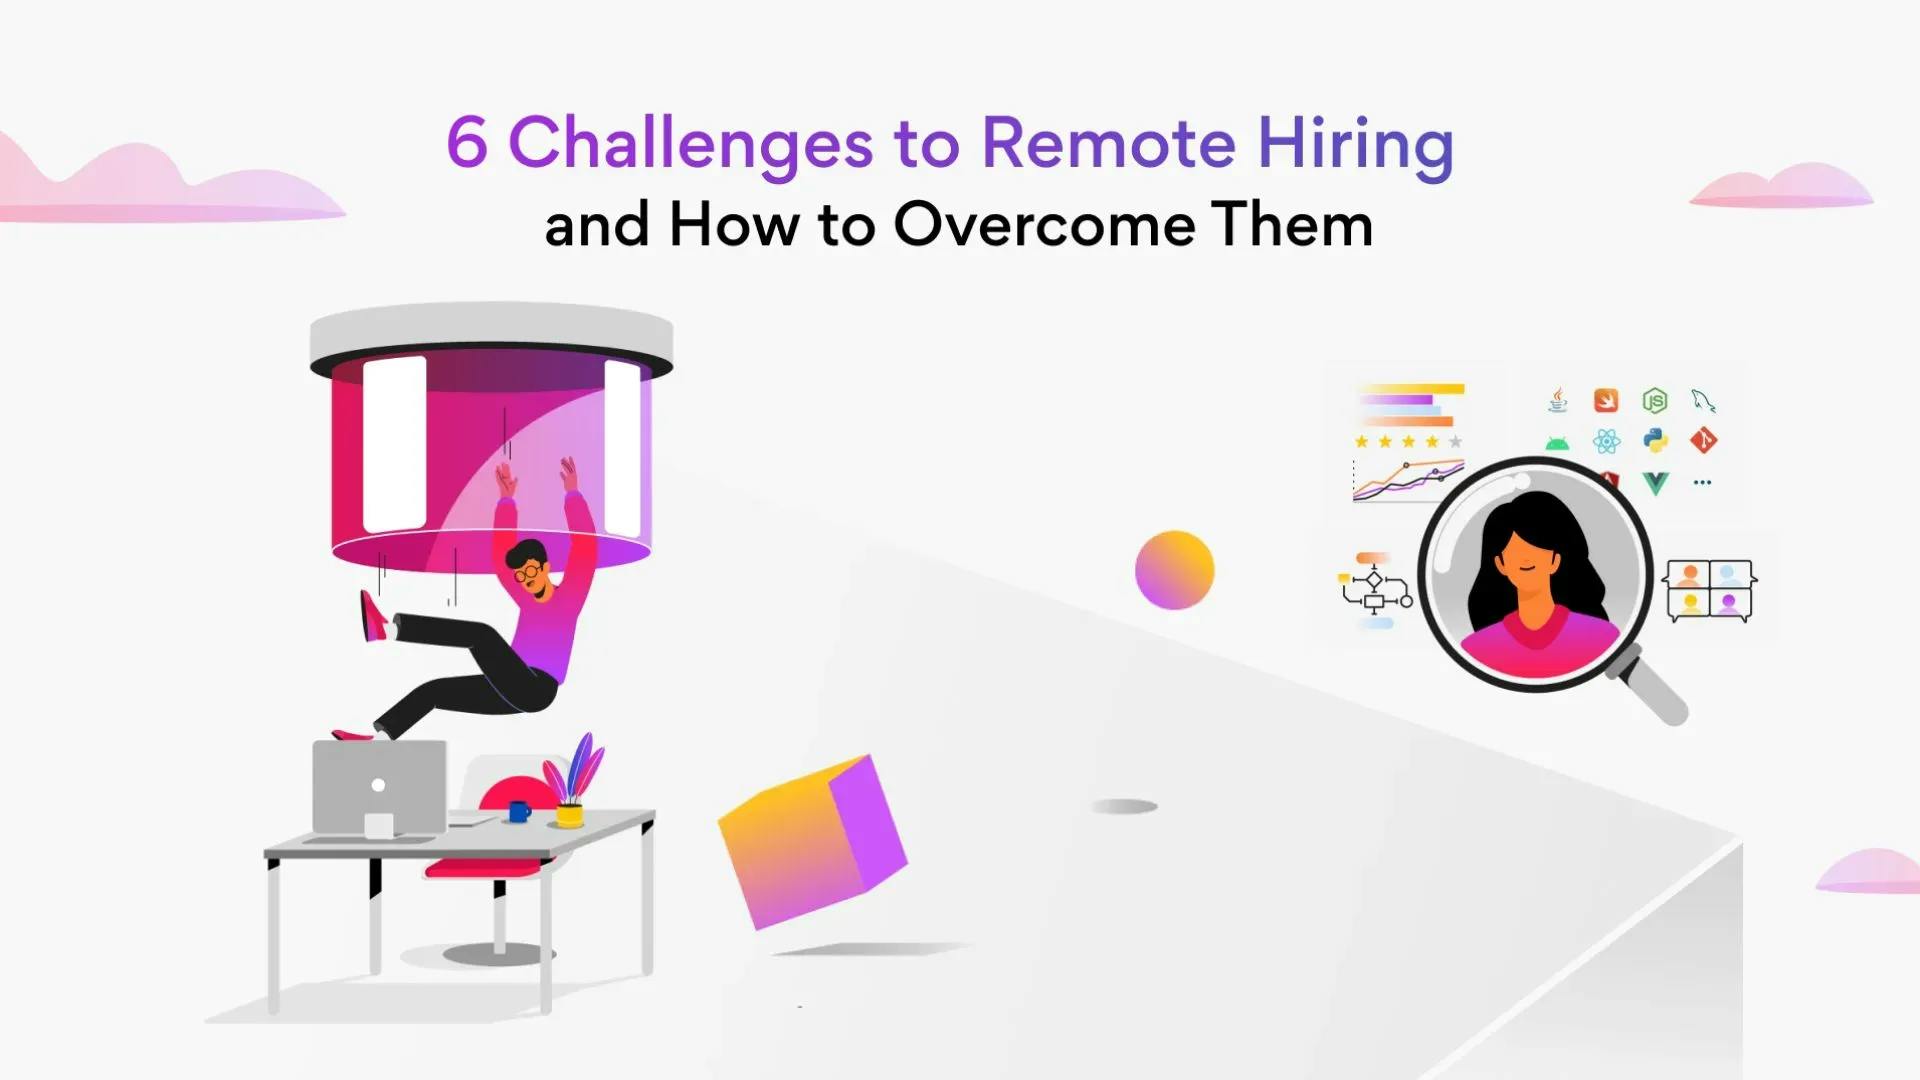 6 Challenges to Remote Hiring and Ways to Overcome Them